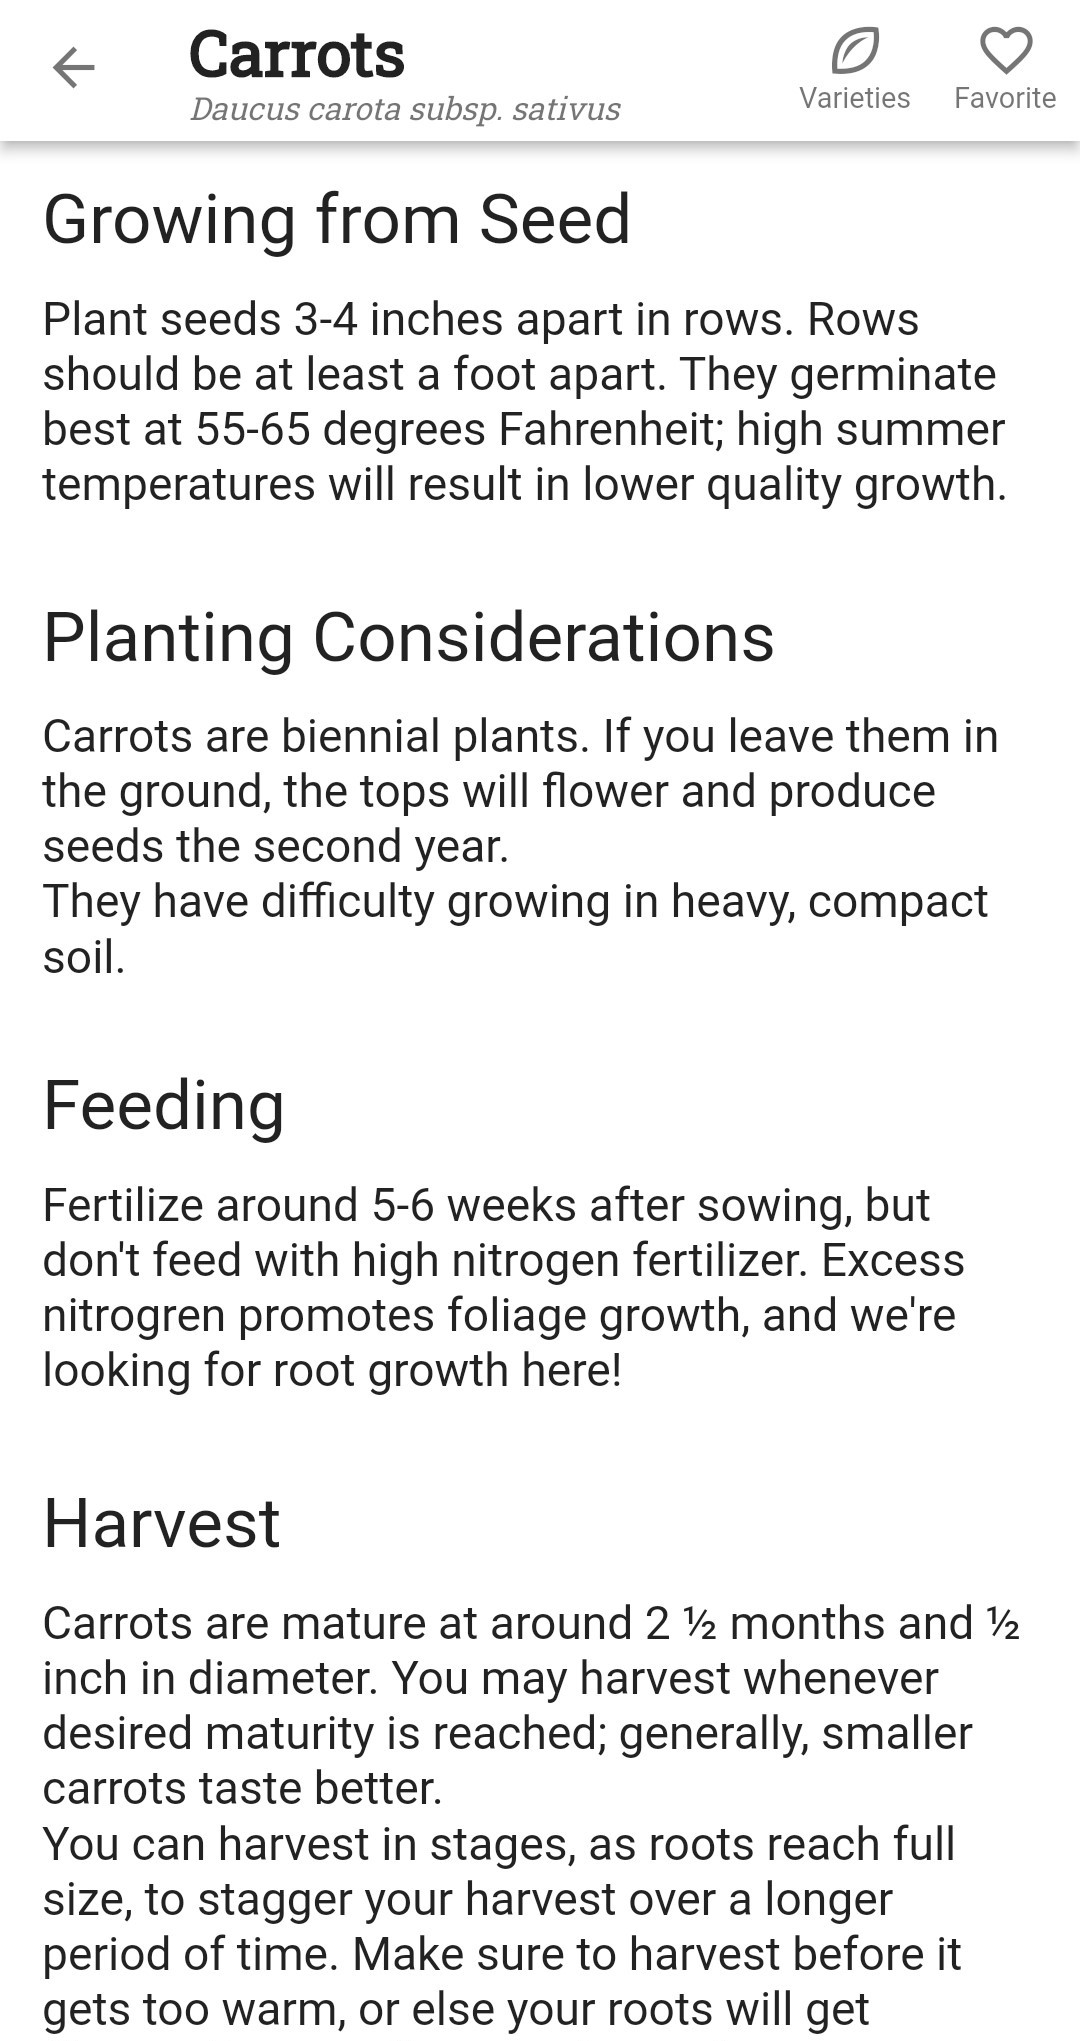 Screenshot of Growing, Planting, Feeding, and Harvest information for carrots